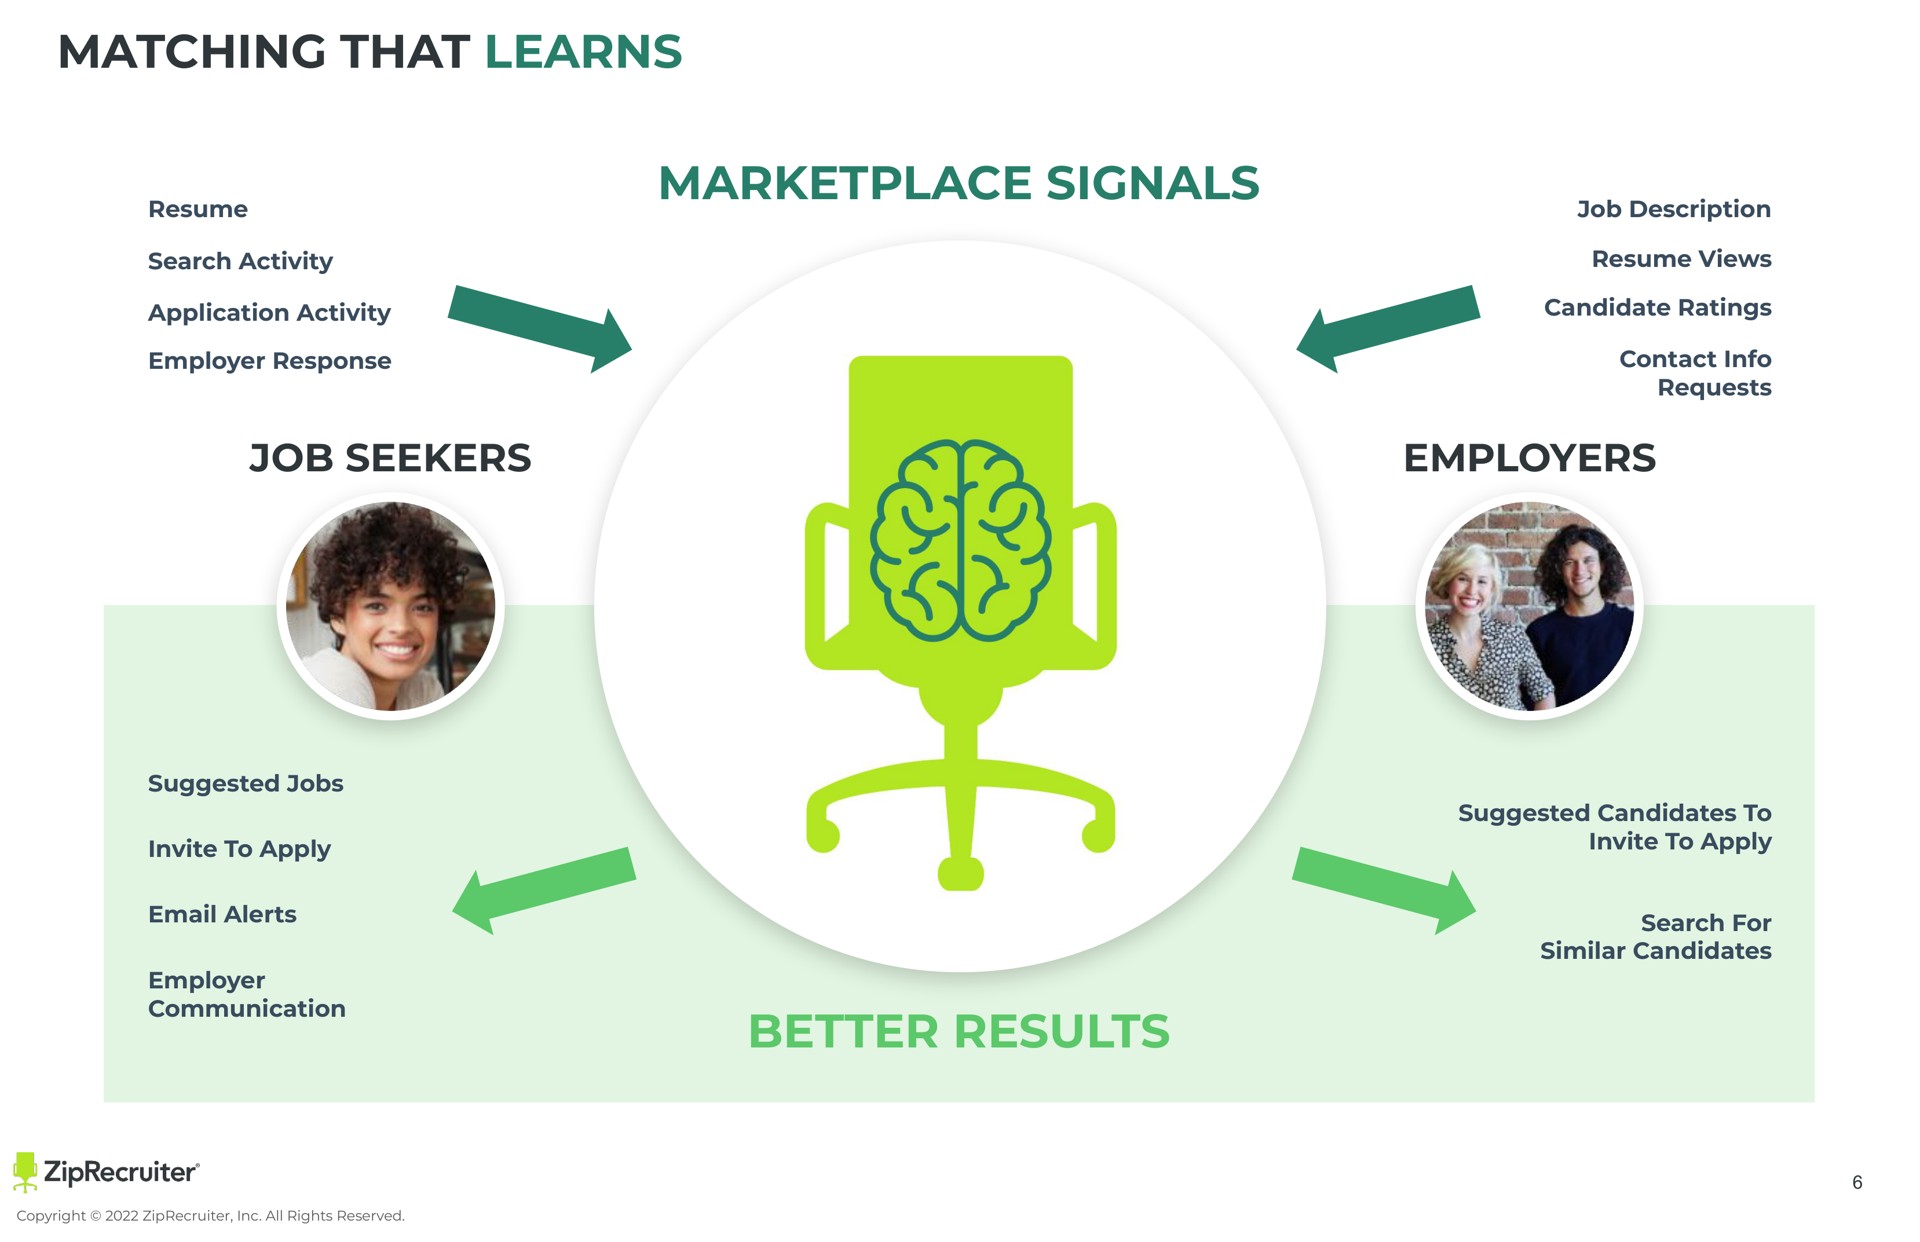 signals job seekers employers better results matching that learns | ZipRecruiter